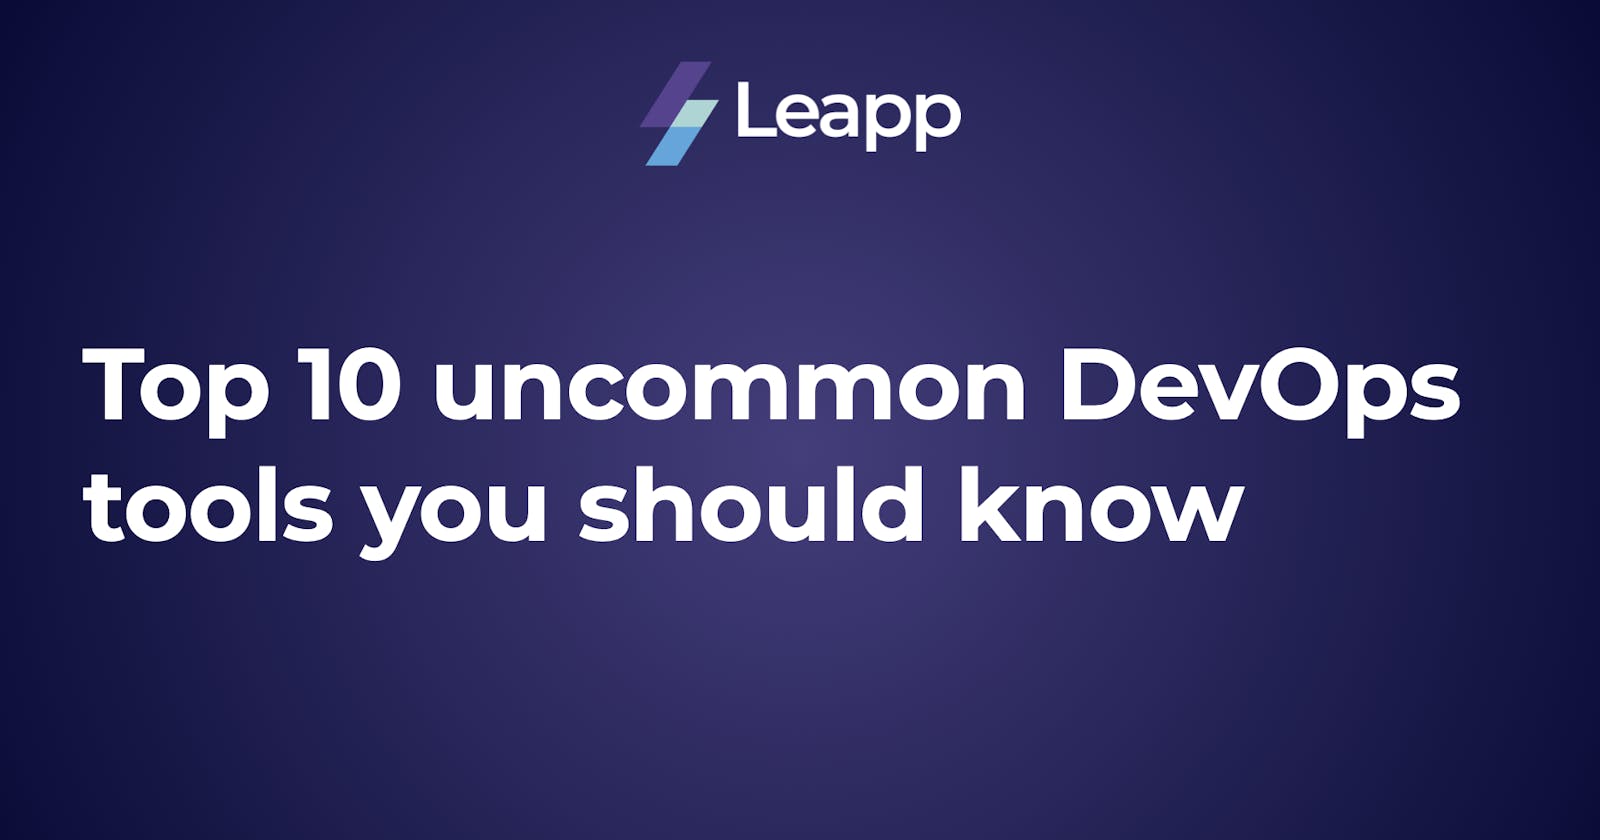 Top 10 uncommon DevOps tools you should know